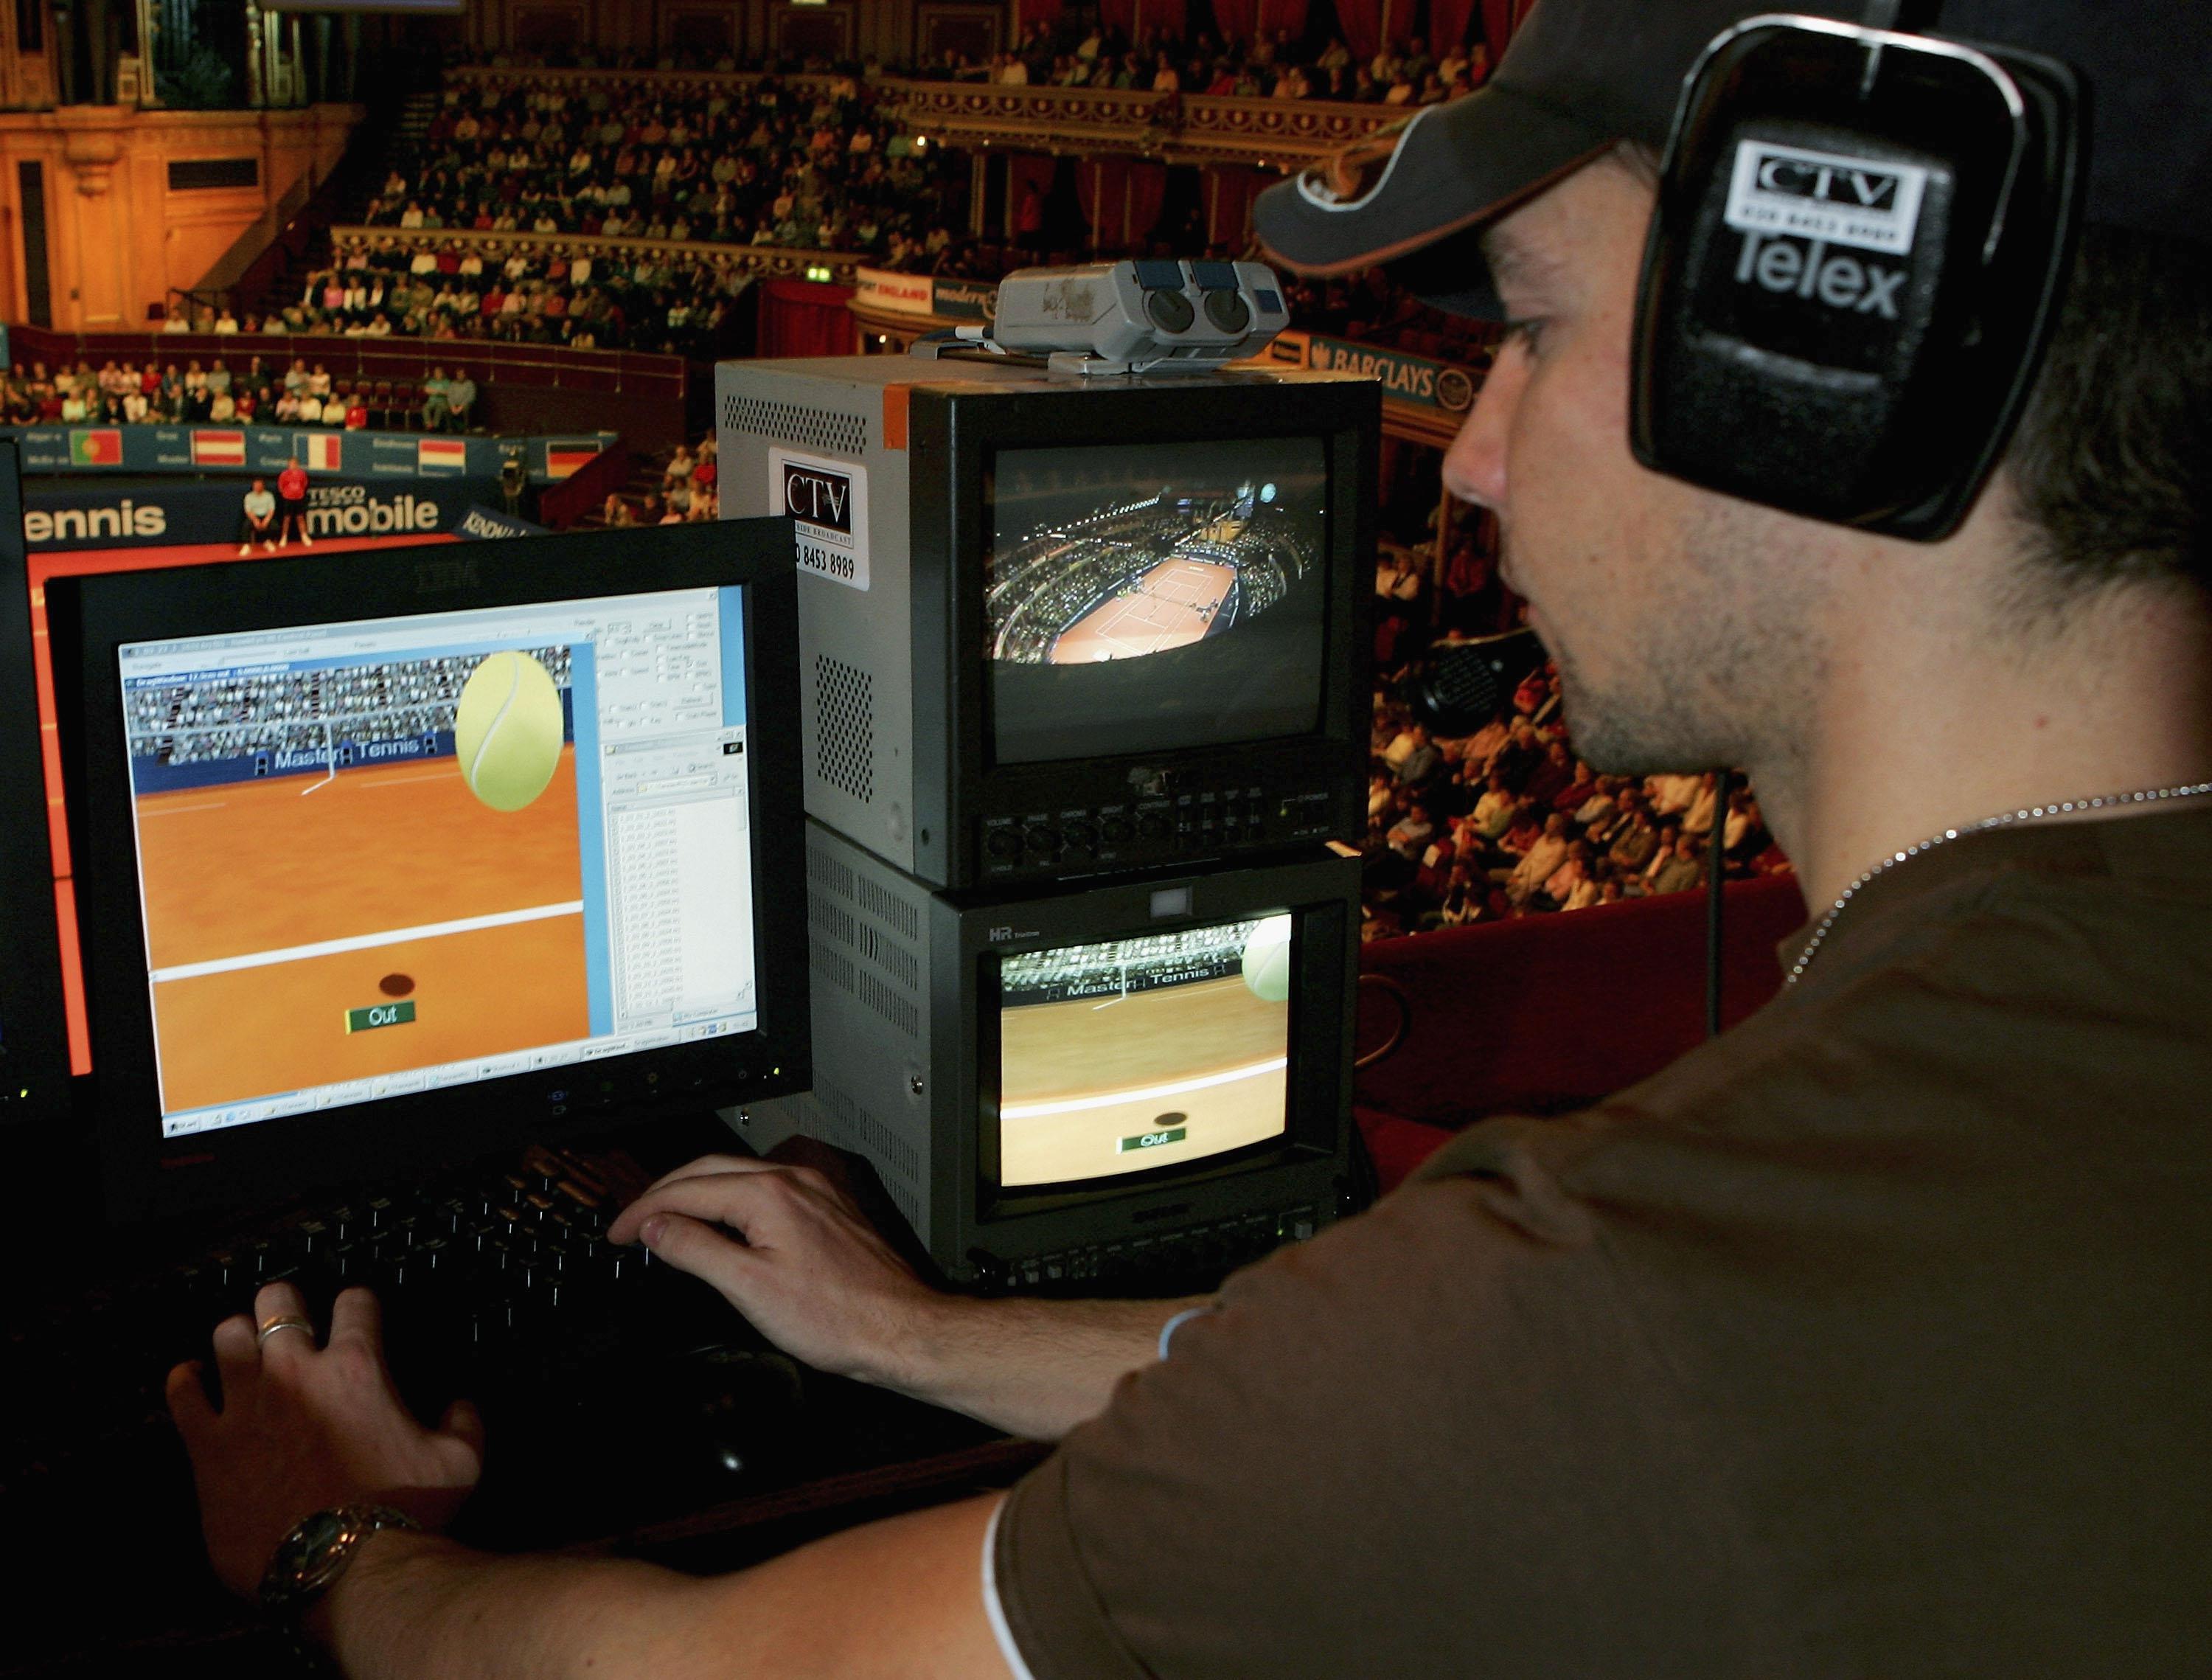 A technician watches screens with the Hawk-Eye system during the Masters Tennis tournament